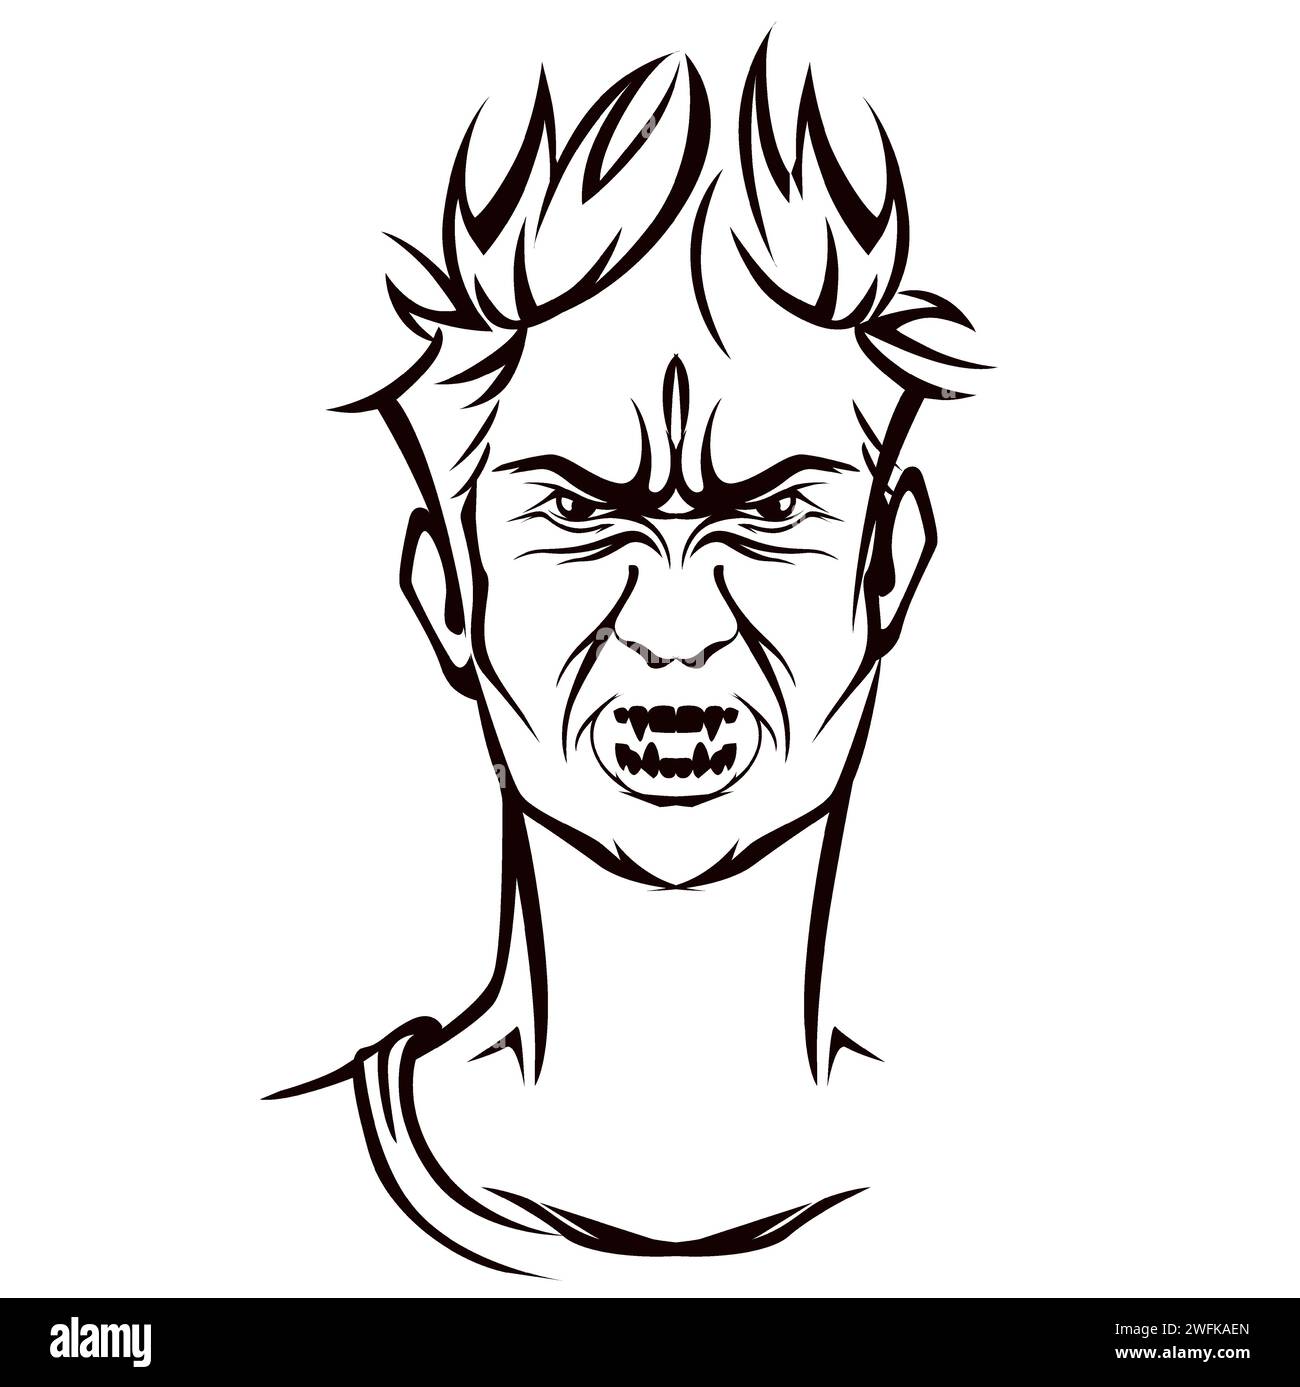 Angry character with madness demonic face Stock Vector